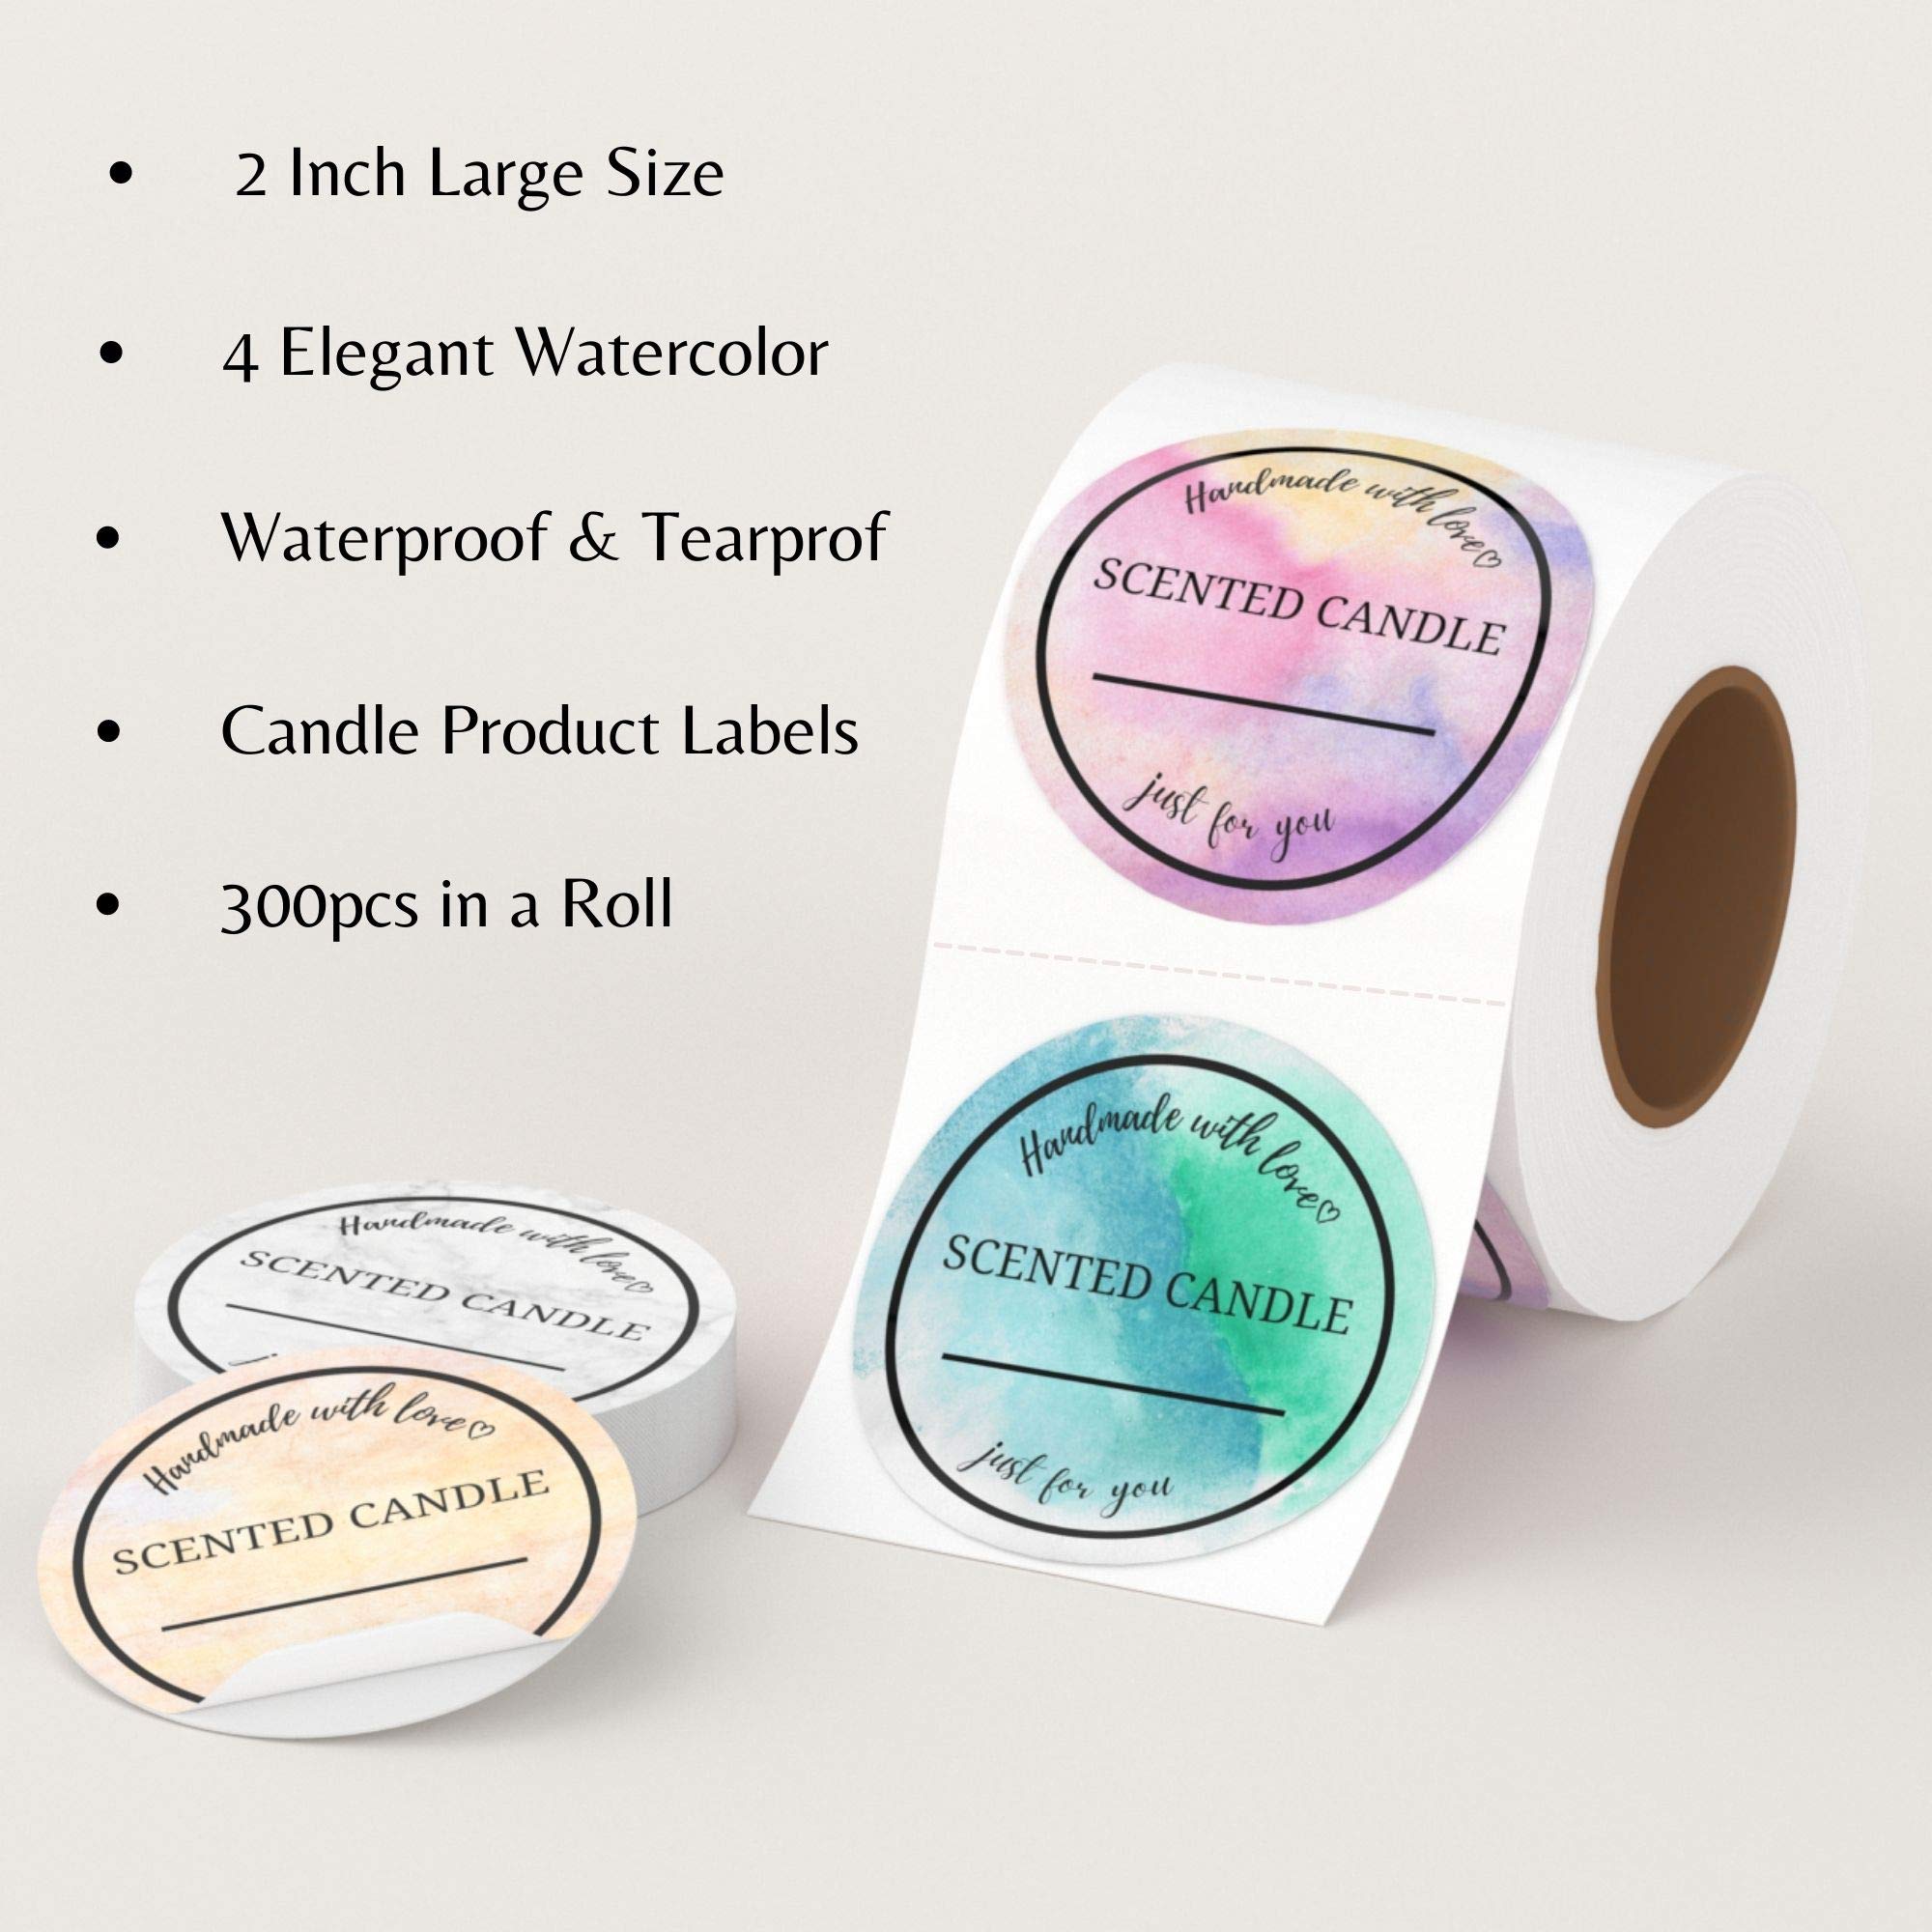 Mobiusea Creation Candle Label Roll | 2 Inch I 300pcs Waterproof Labels for Candle Making Supplies, Candle Tins, Candle Container, Candle Jars with lids, Candle Boxes Packaging